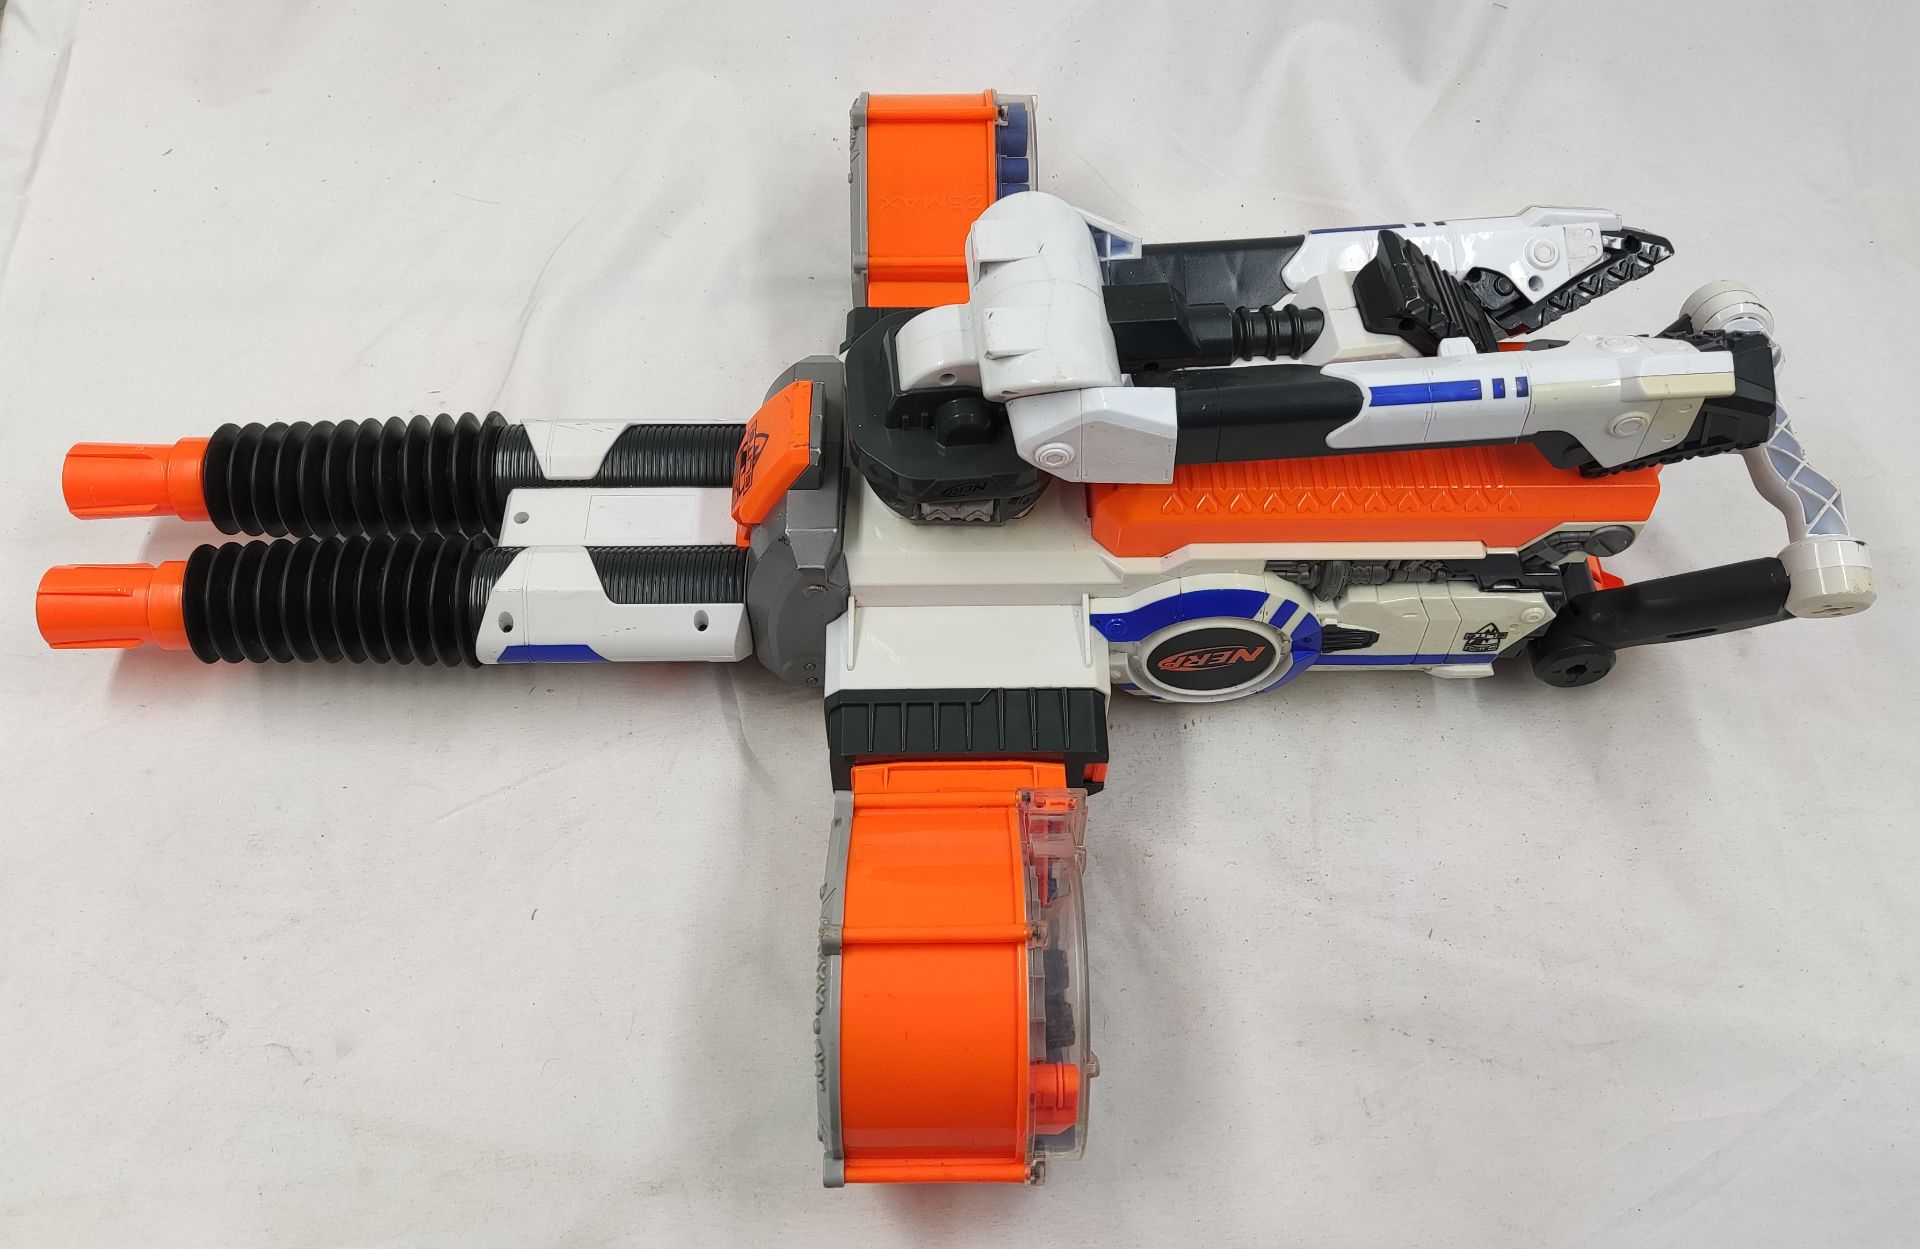 1 x Nerf Rhino-Fire Electric Nerf Gun with Moving Barrels - Used - CL444 - NO VAT ON THE HAMMER - - Image 8 of 12